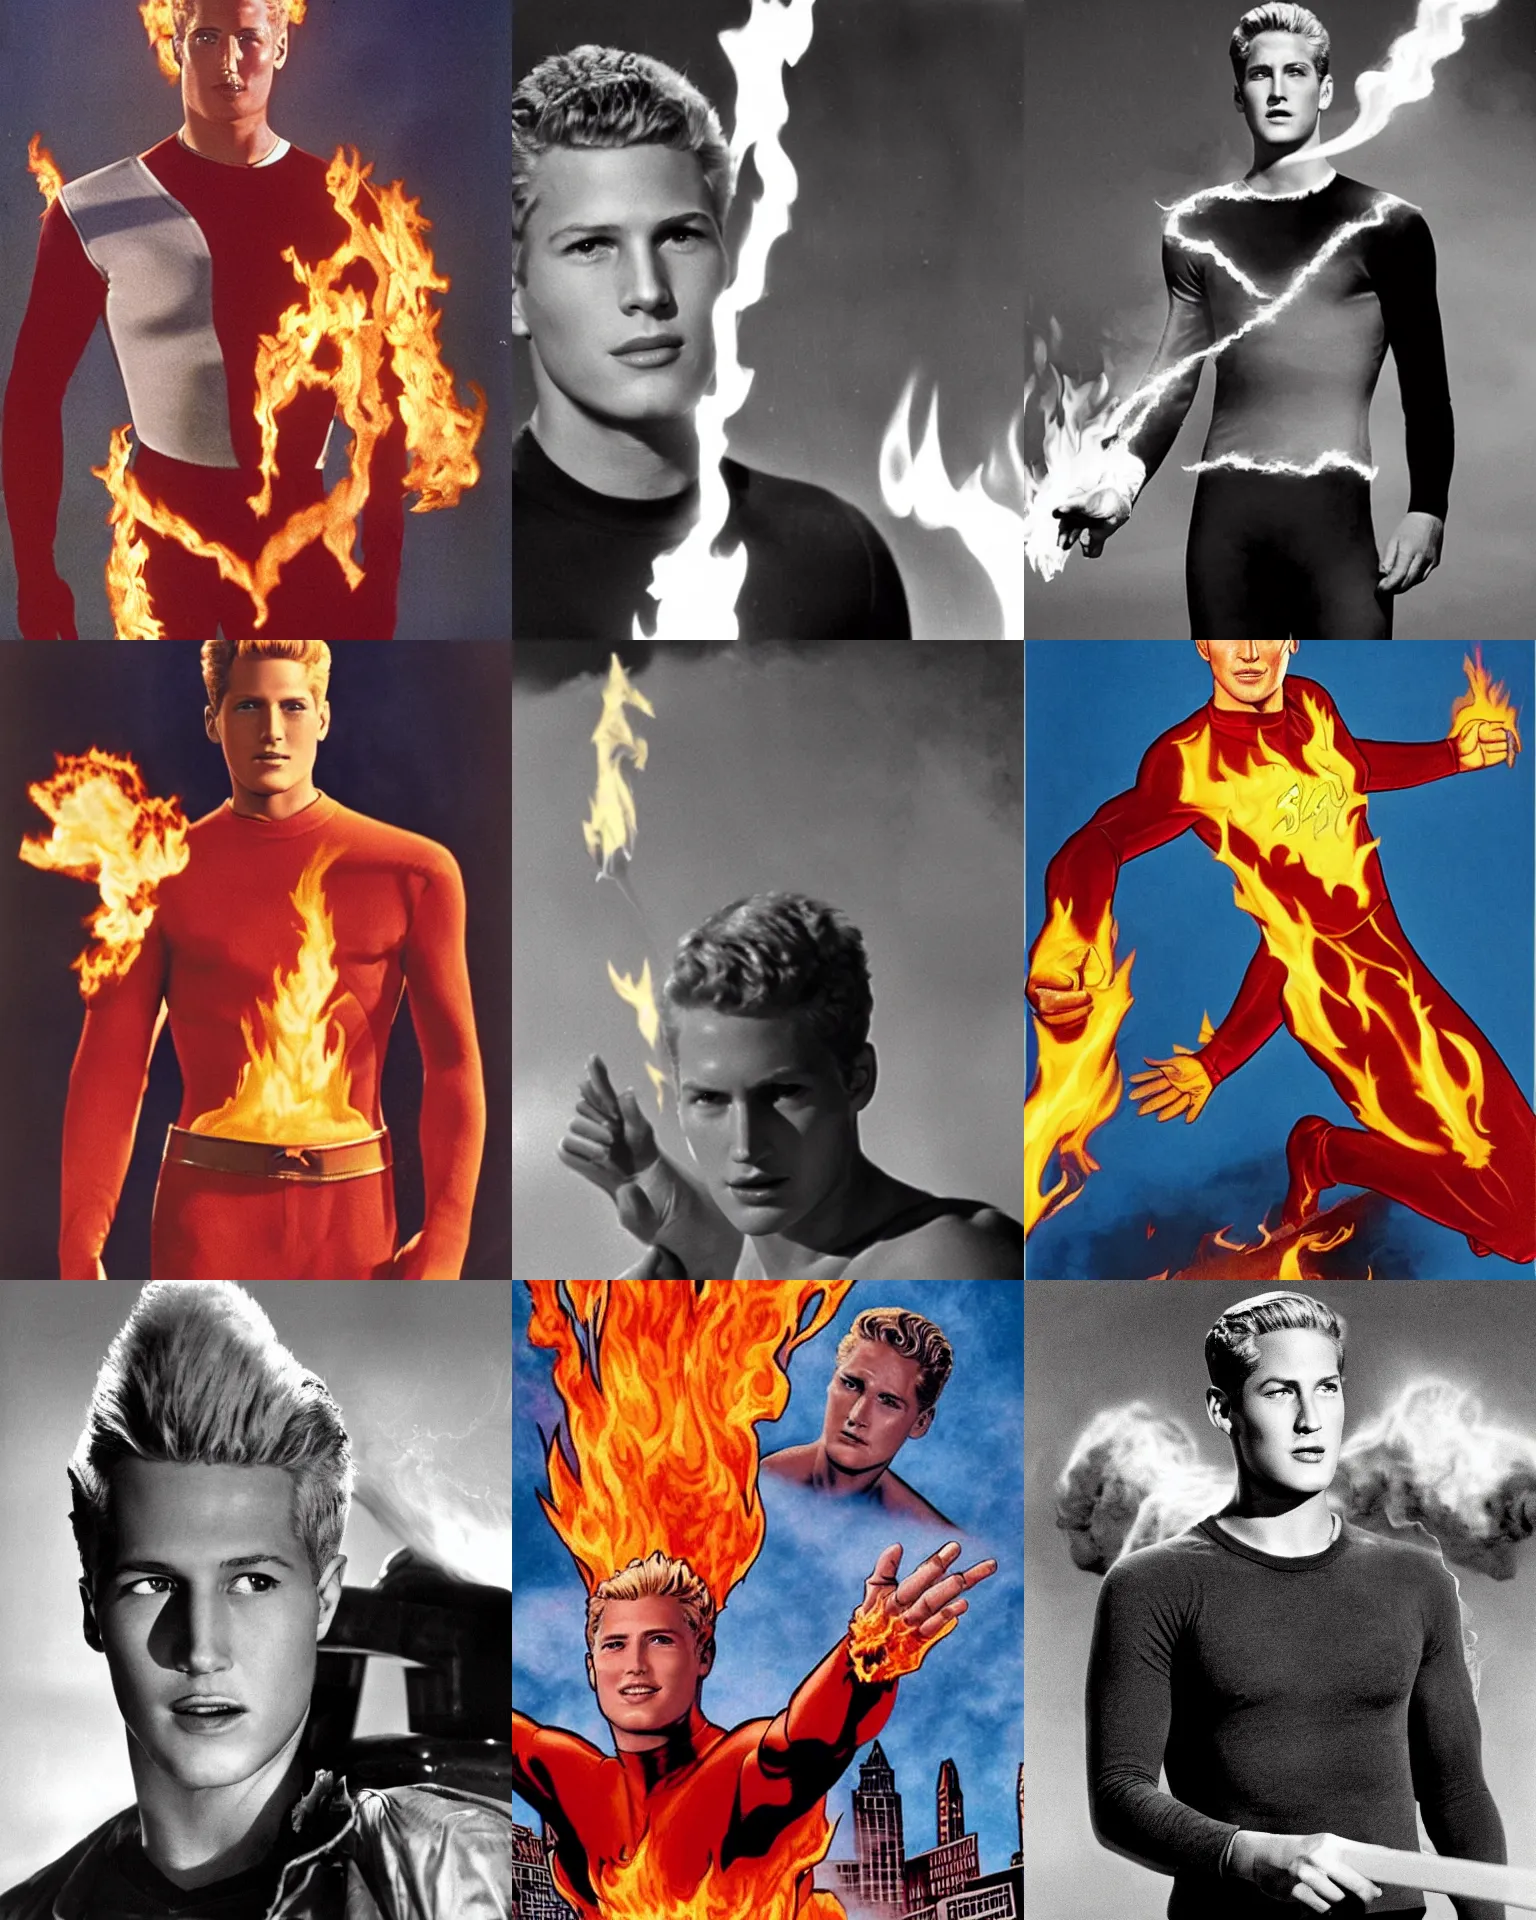 Prompt: Young Paul Newman starring as Johnny Storm, The Human Torch from The Fantastic Four Movie, Flame On, Entirely Engulfed in Fire and Smoke as The Human Torch, Color, Modern